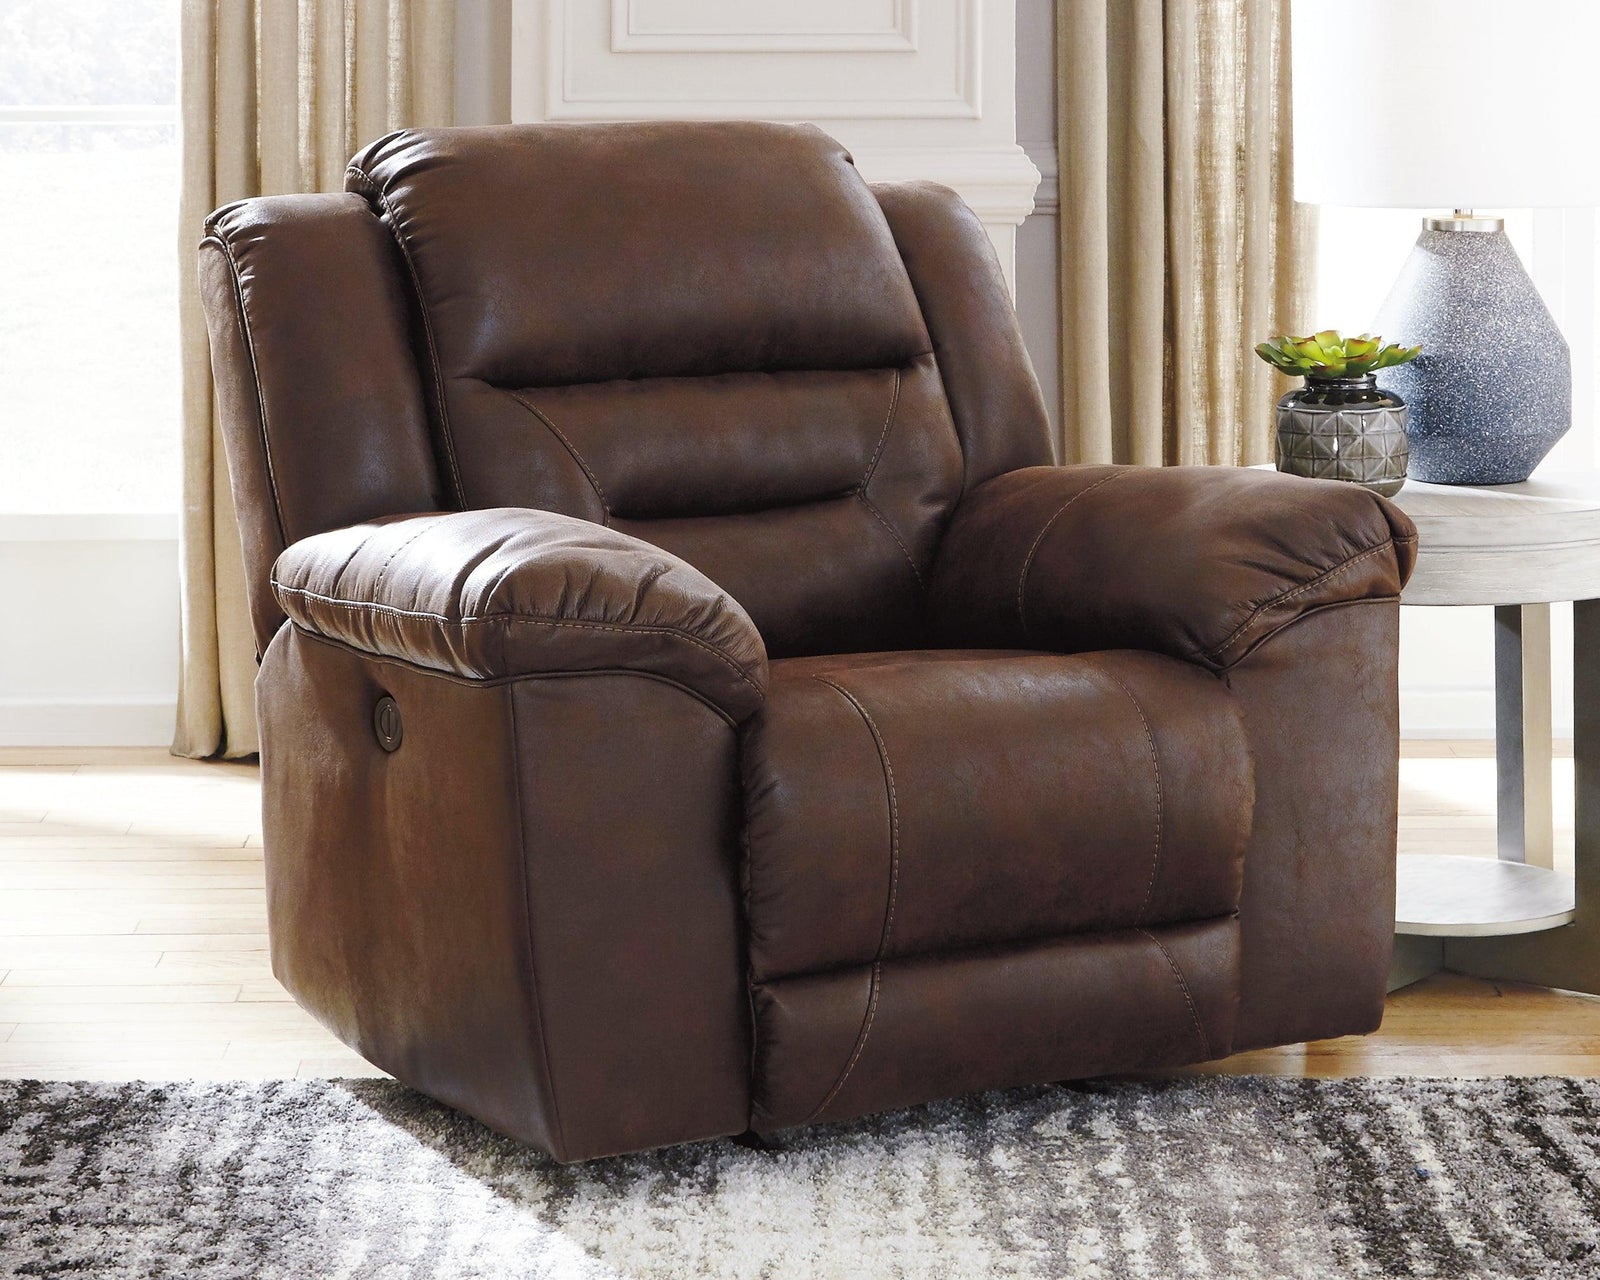 Stoneland Chocolate Faux Leather Power Recliner